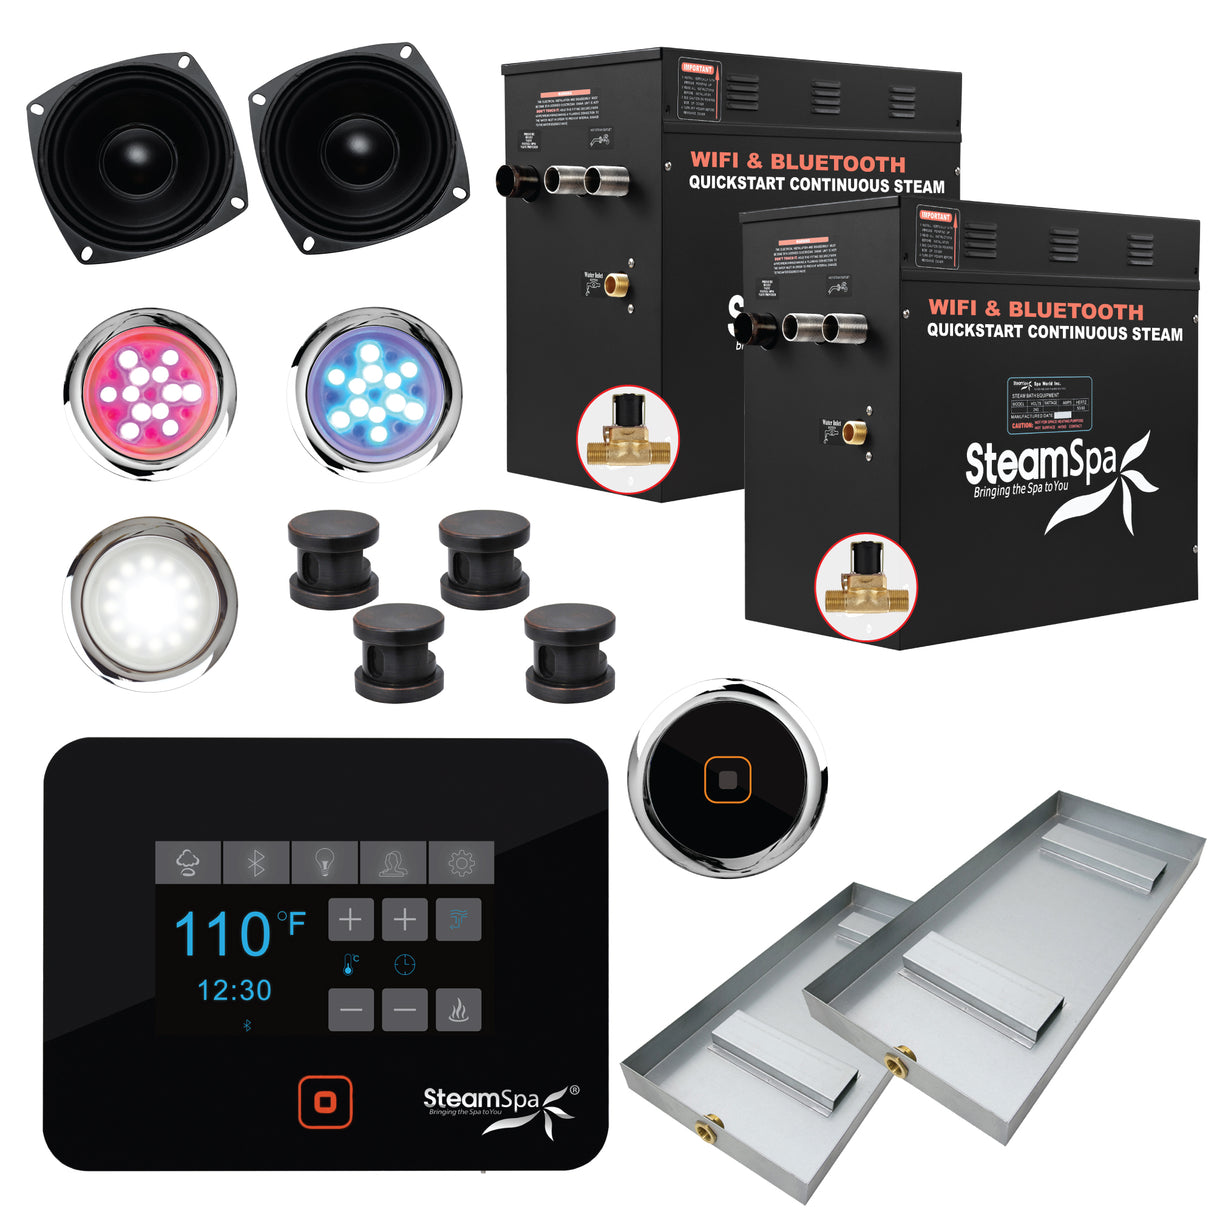 Black Series Wifi and Bluetooth 24kW QuickStart Steam Bath Generator Package in Oil Rubbed Bronze BKT2400ORB-A